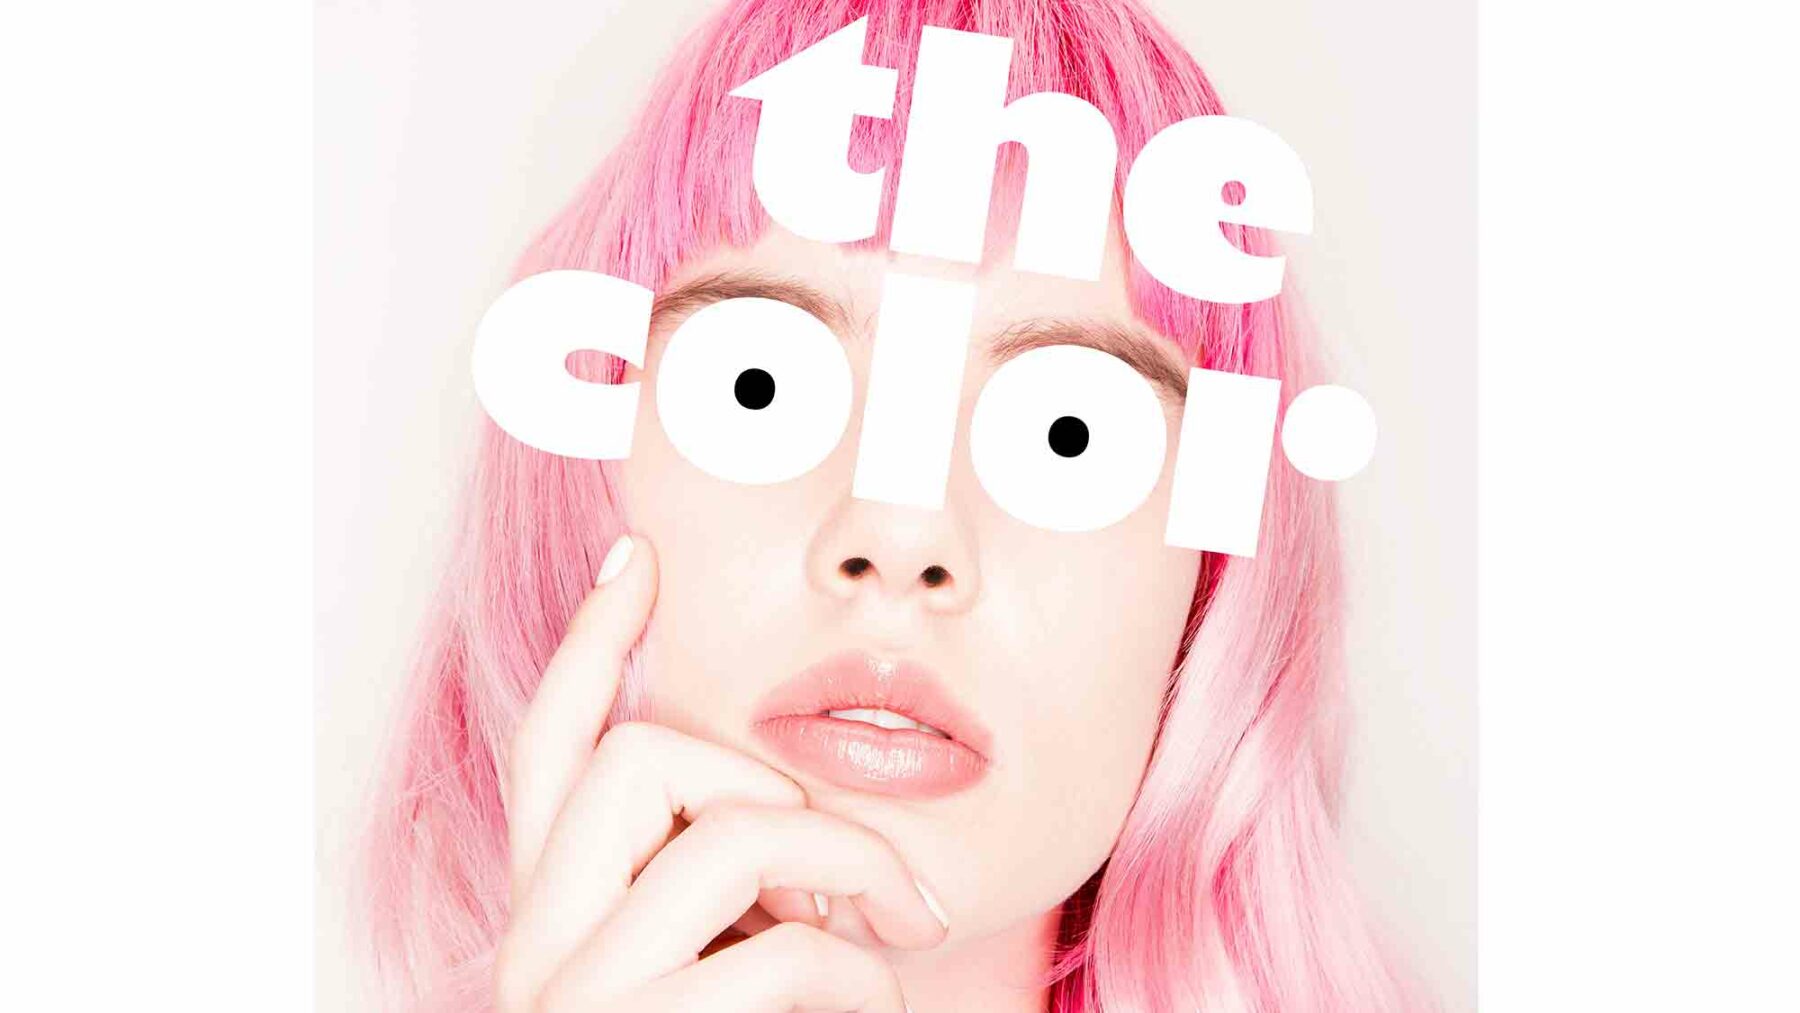 thecolor cover supercreative